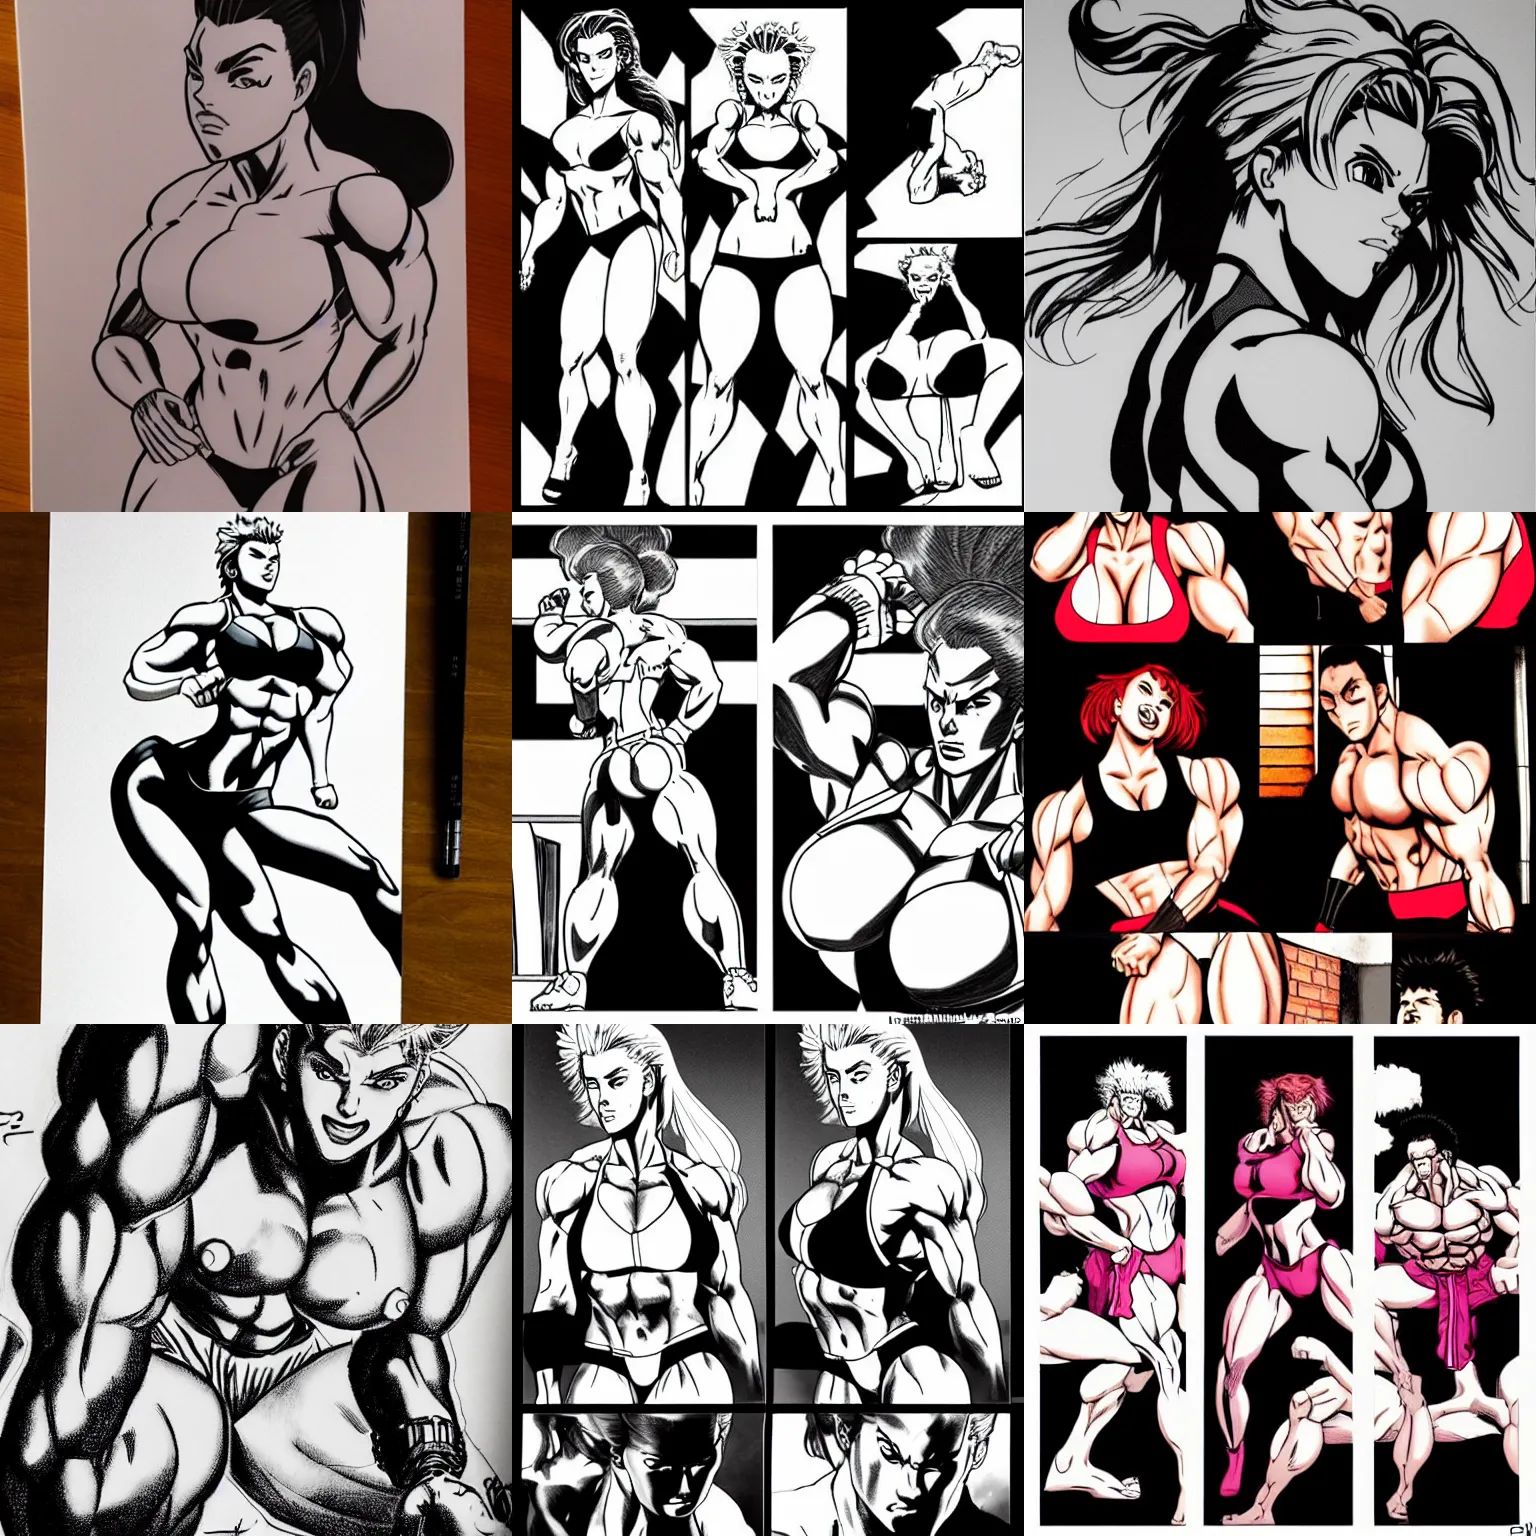 Prompt: scarlett johansson as body builder in baki anime manga style, 3 panel, pencil and ink, dramatic lighting, full body action profile